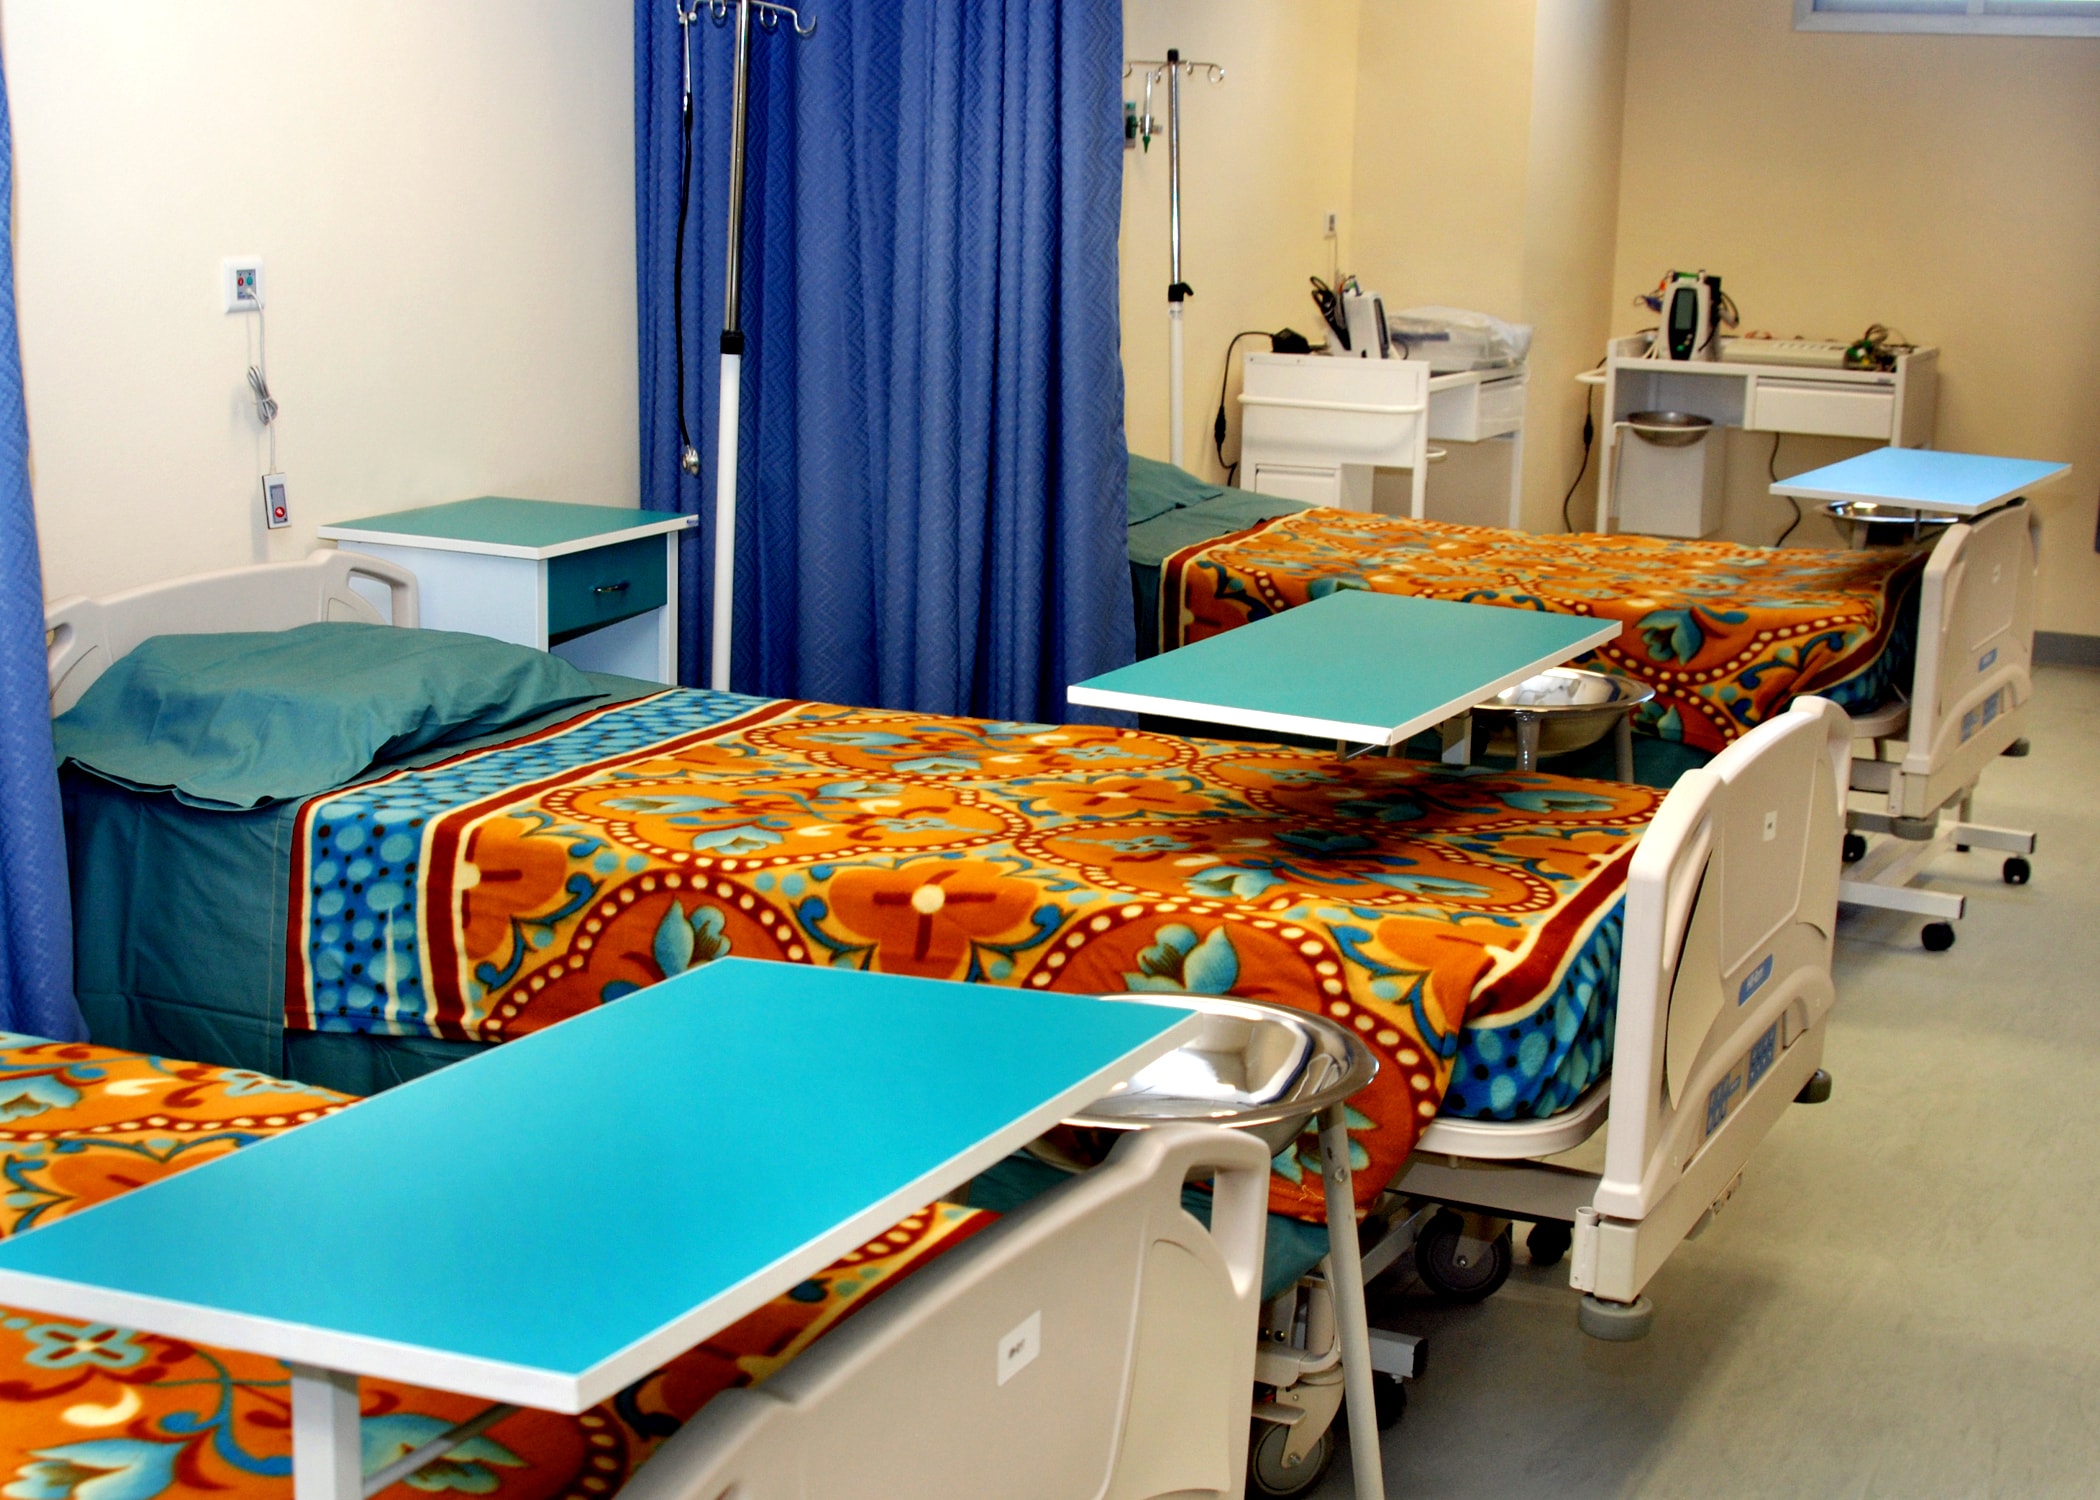 A patient bed in a hospital